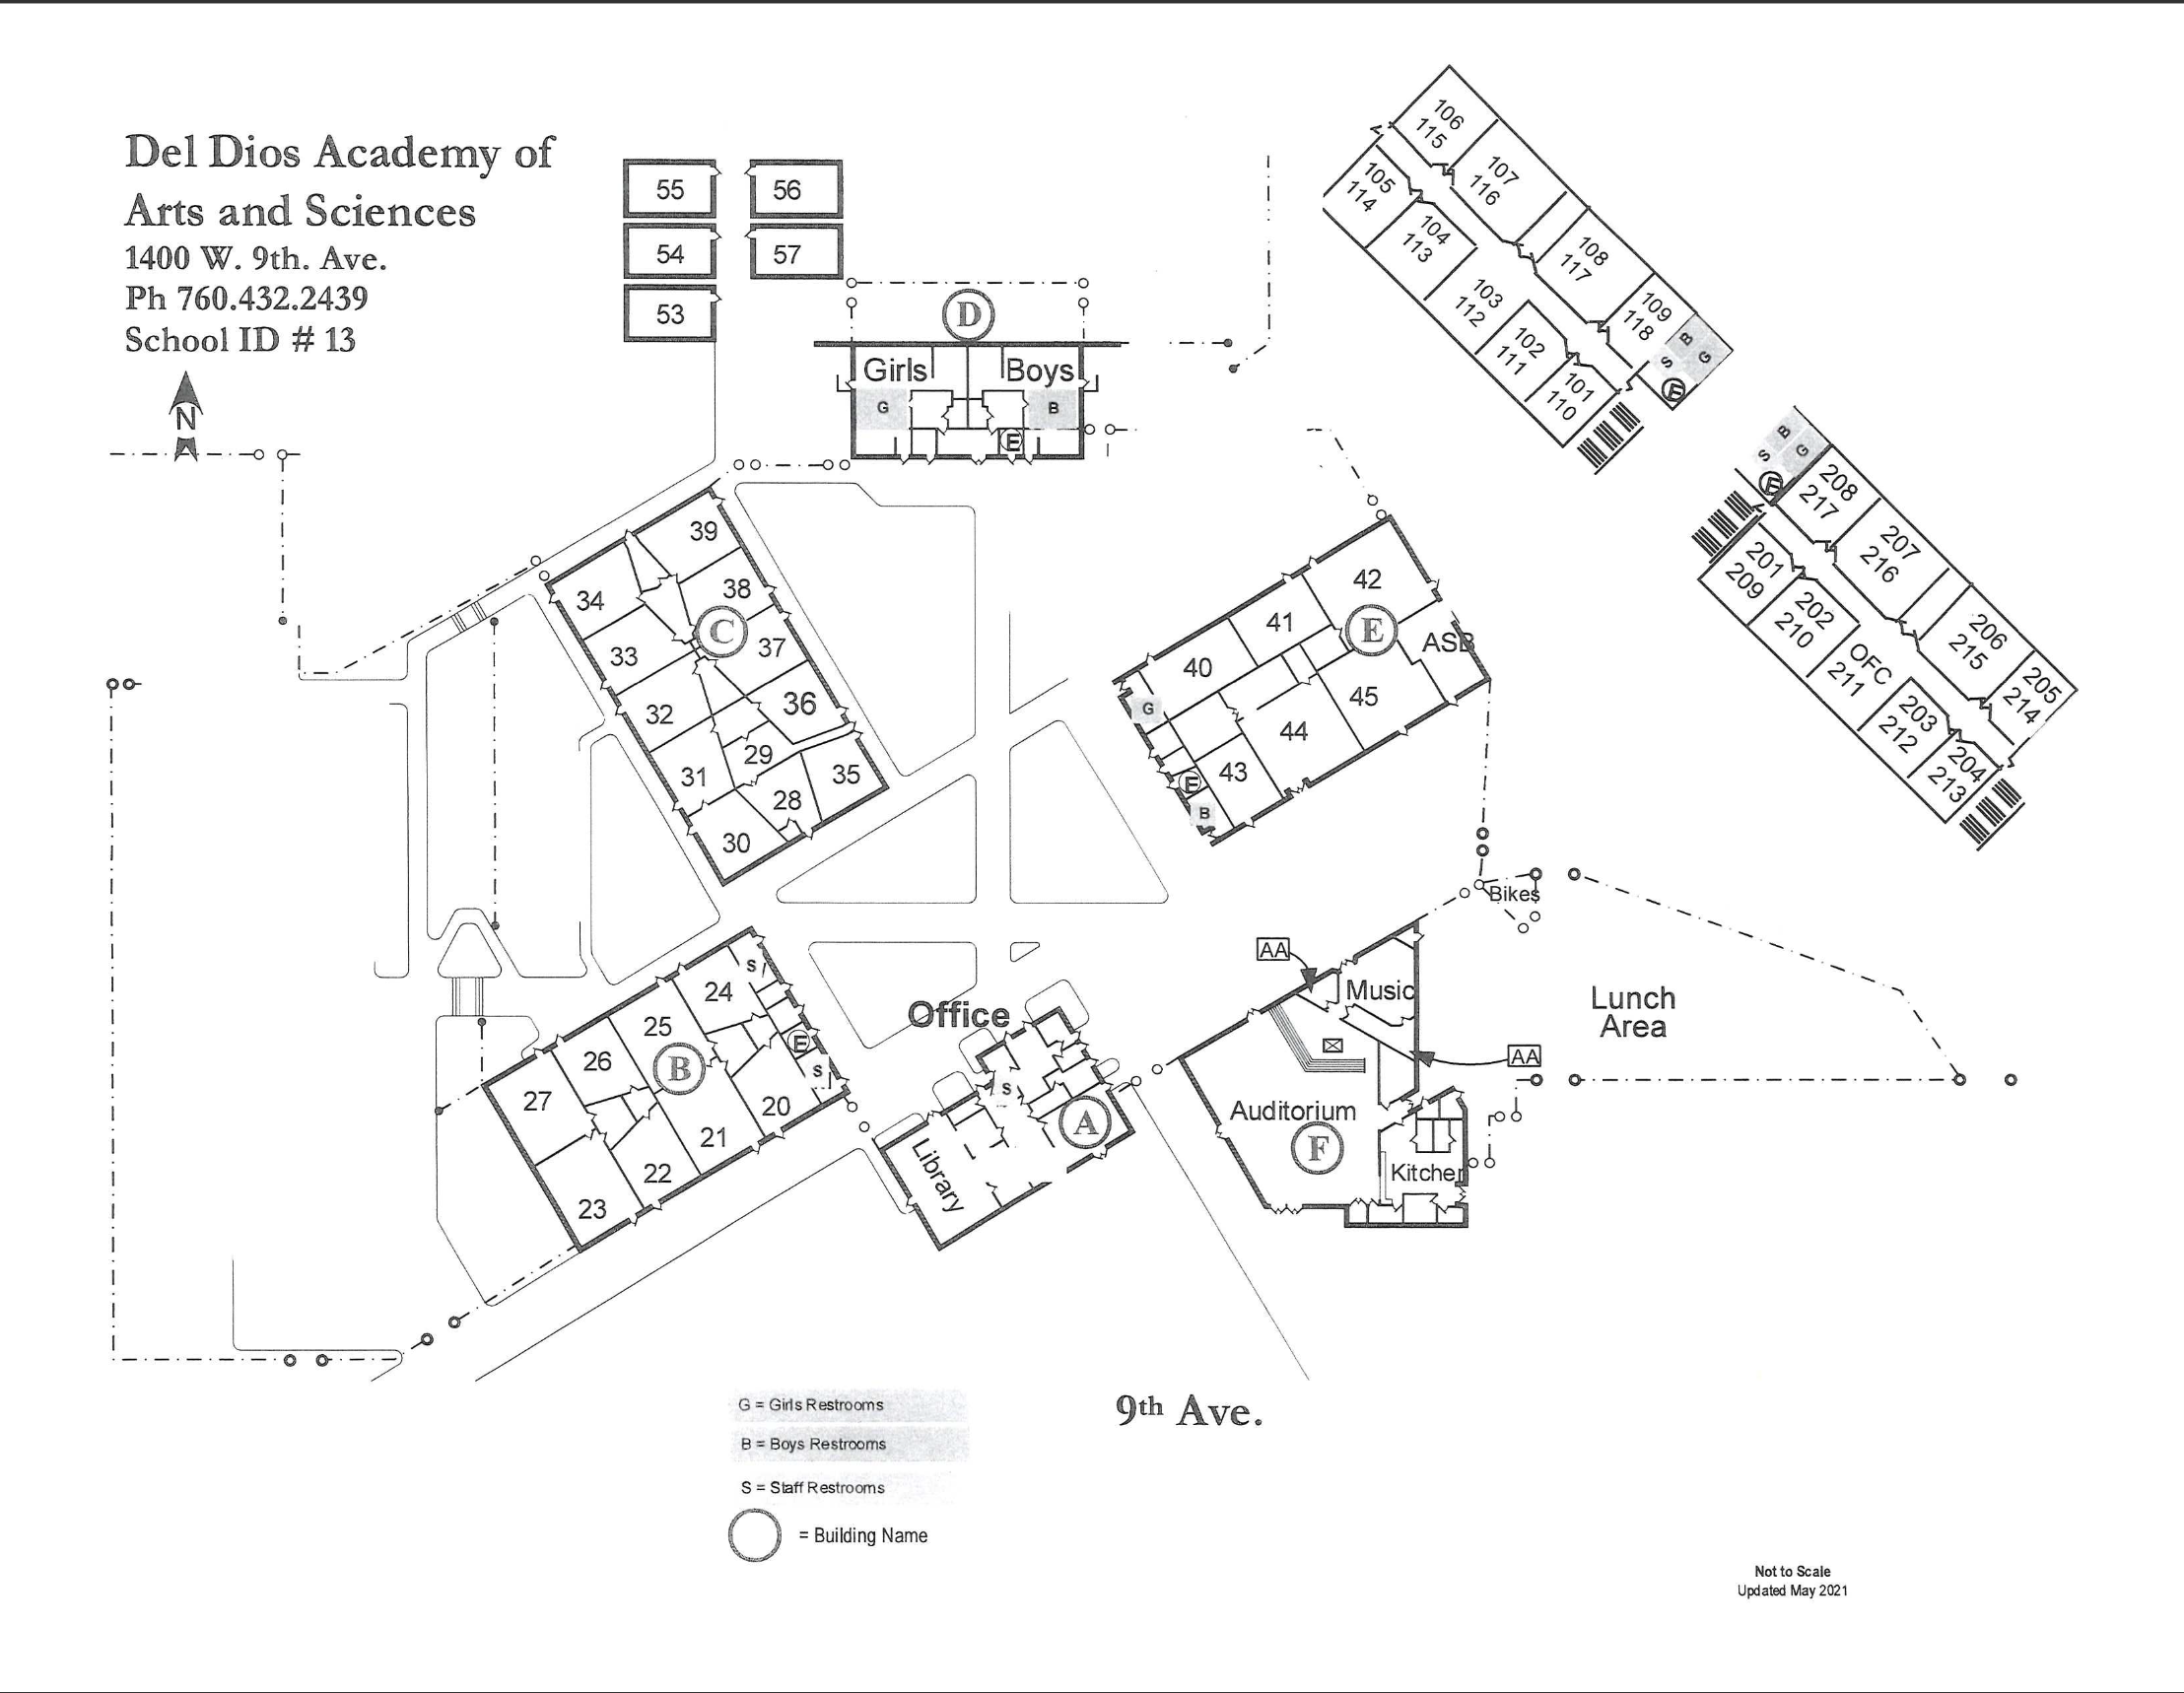 Map of Del Dios Academy of Arts and Sciences, including the VAPA and STEM Buildings